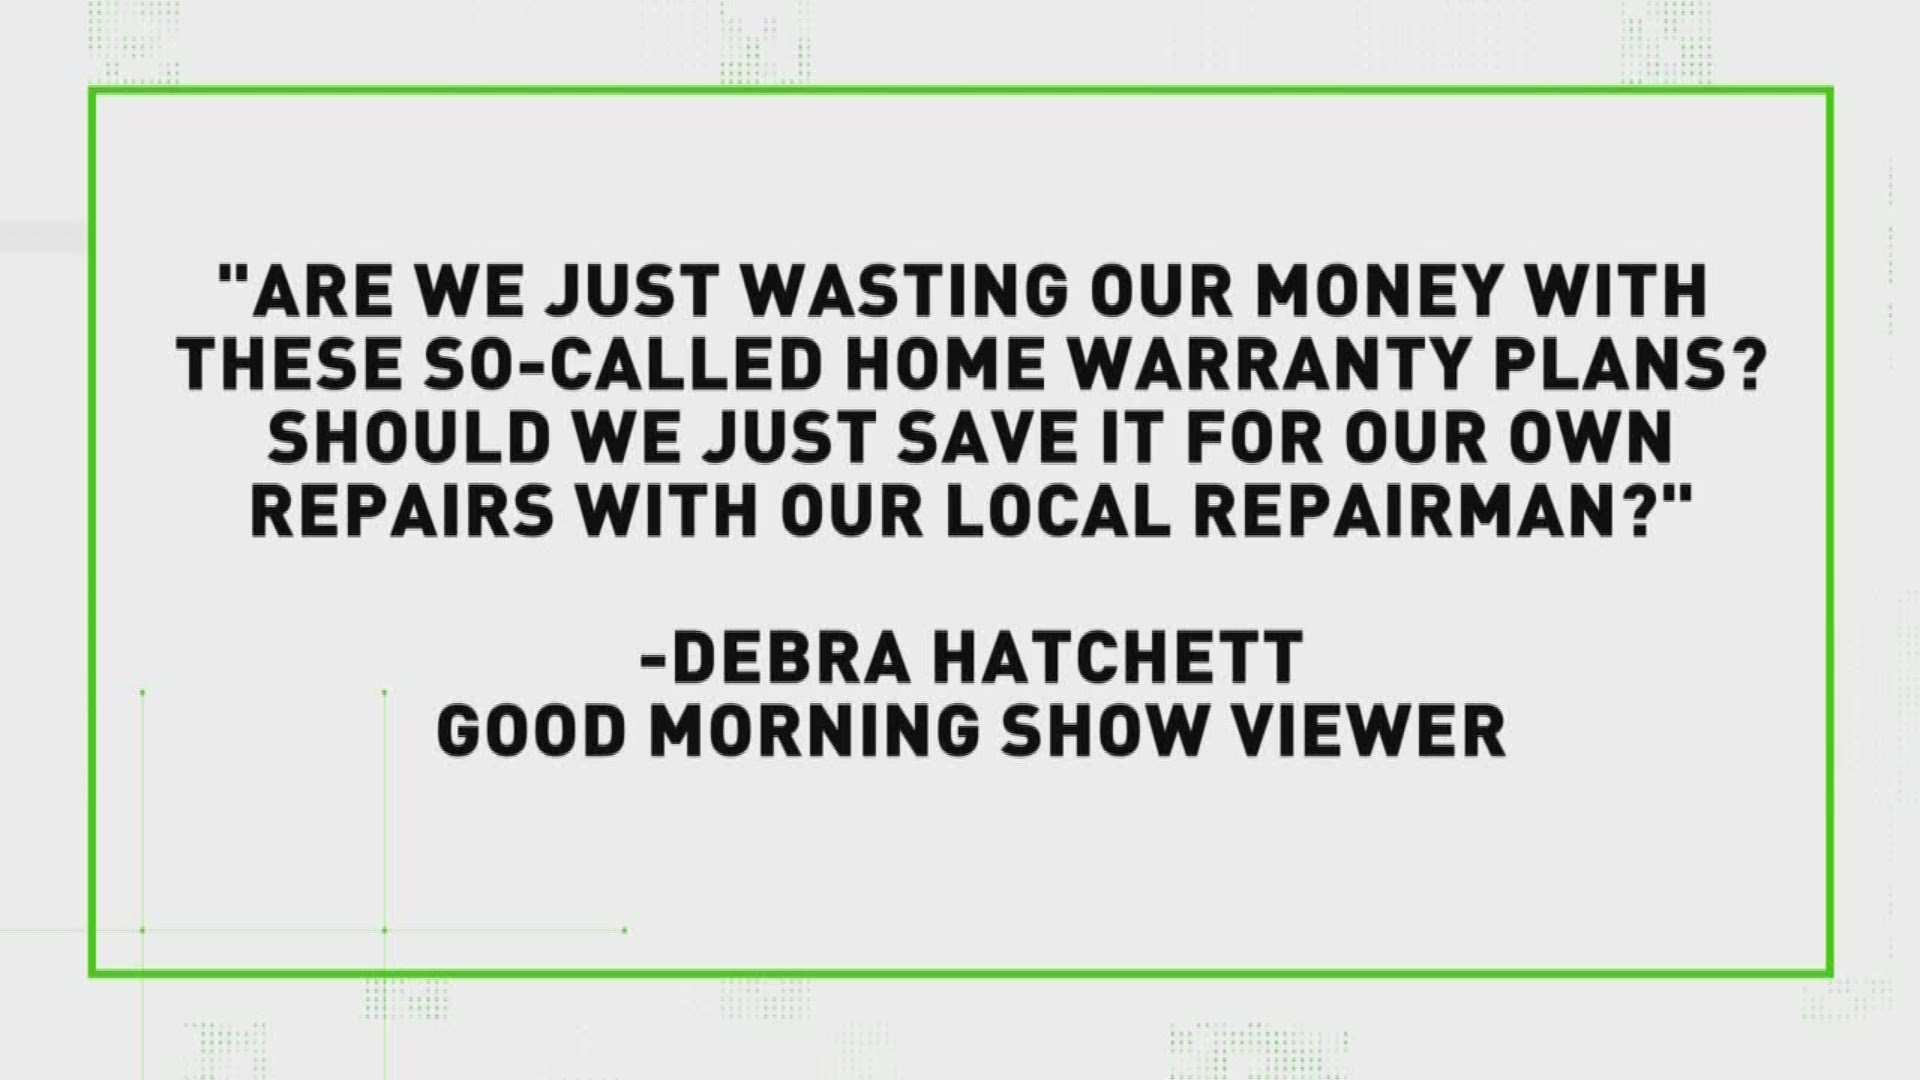 Read the fine print before committing to a home warranty policy. You might not need it.